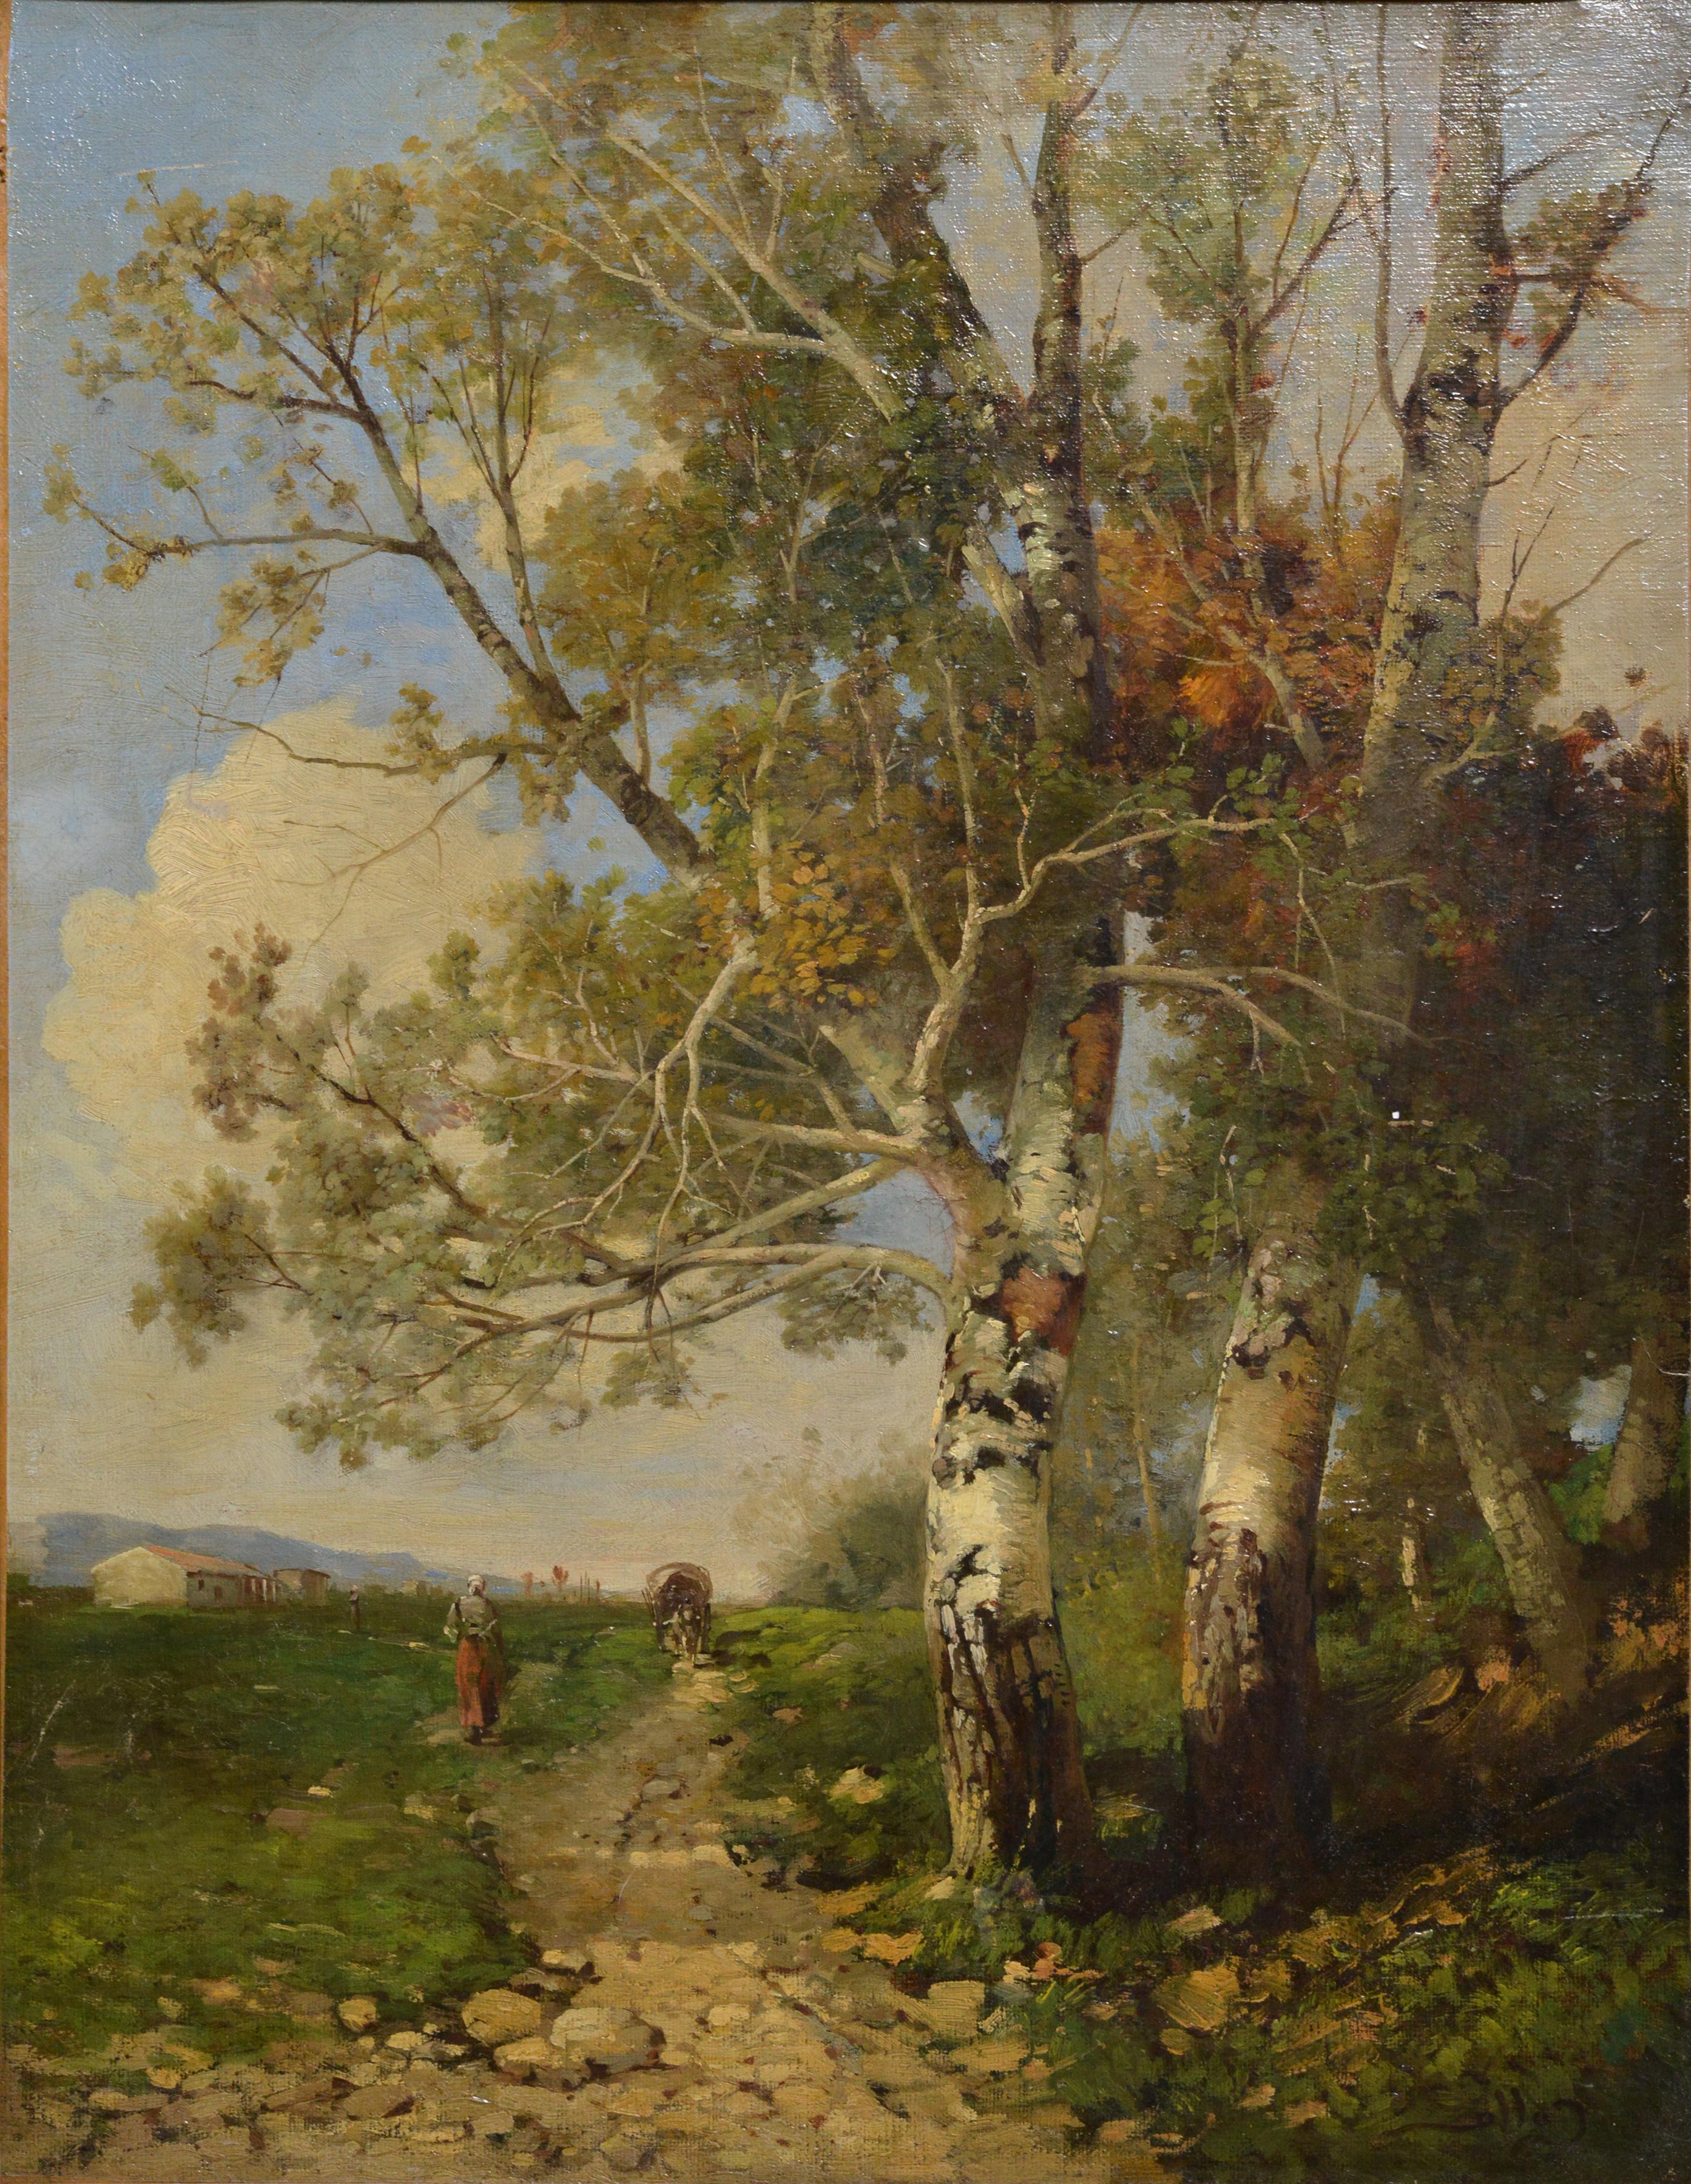 Summer Landscape with Birches by Austrian Master Gollob Early 20th century Oil - Painting by Heinrich Gollob